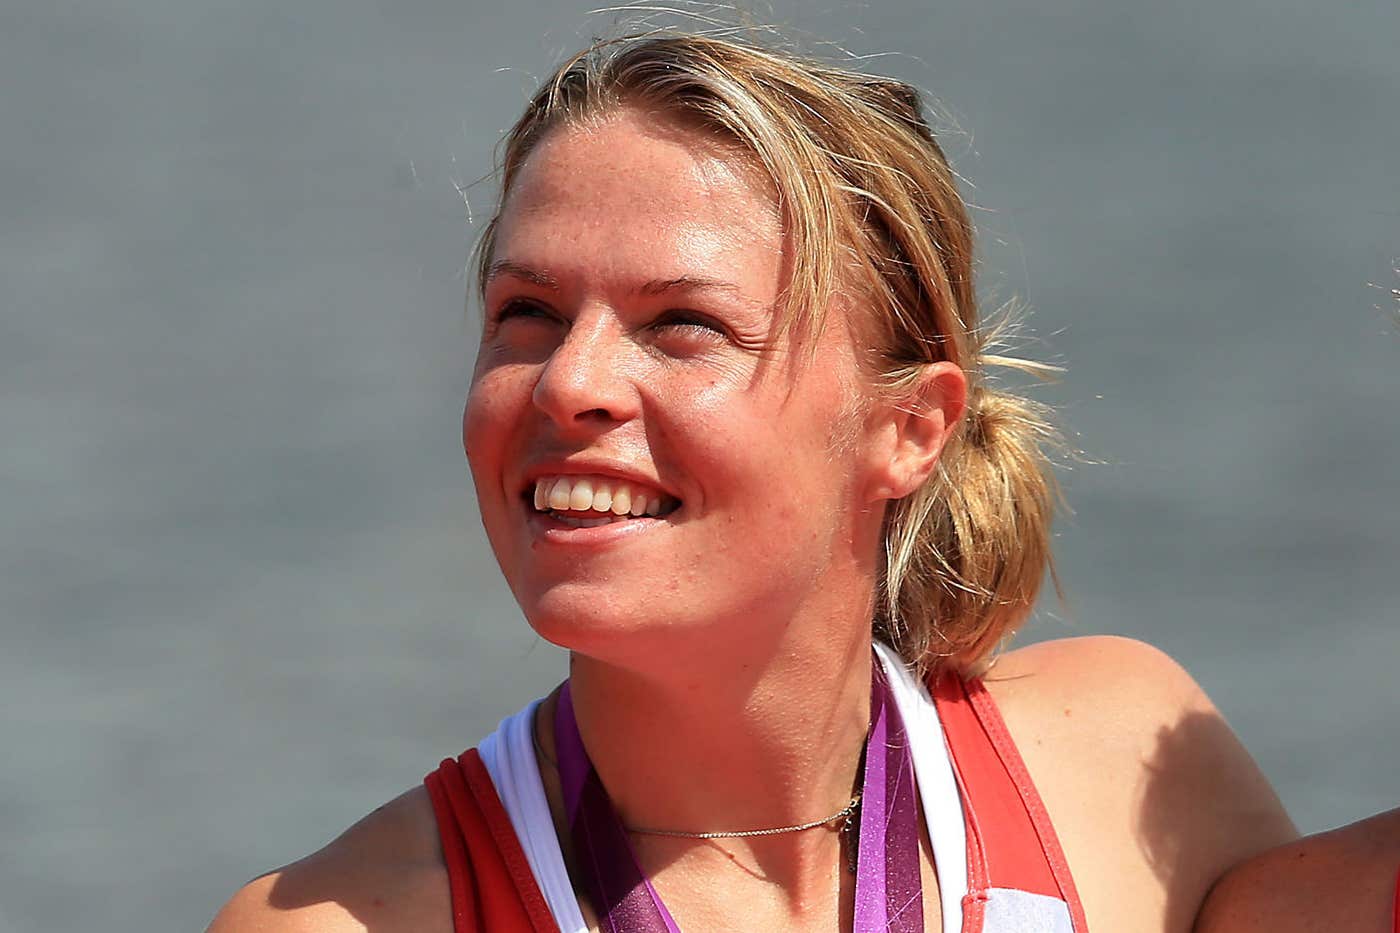 Anna Watkins, pictured after winning double scull gold at London 2012 with Katherine Grainger, is keen to promote the support available to athletes when they leave their funded programmes (Stephen Pond/PA)